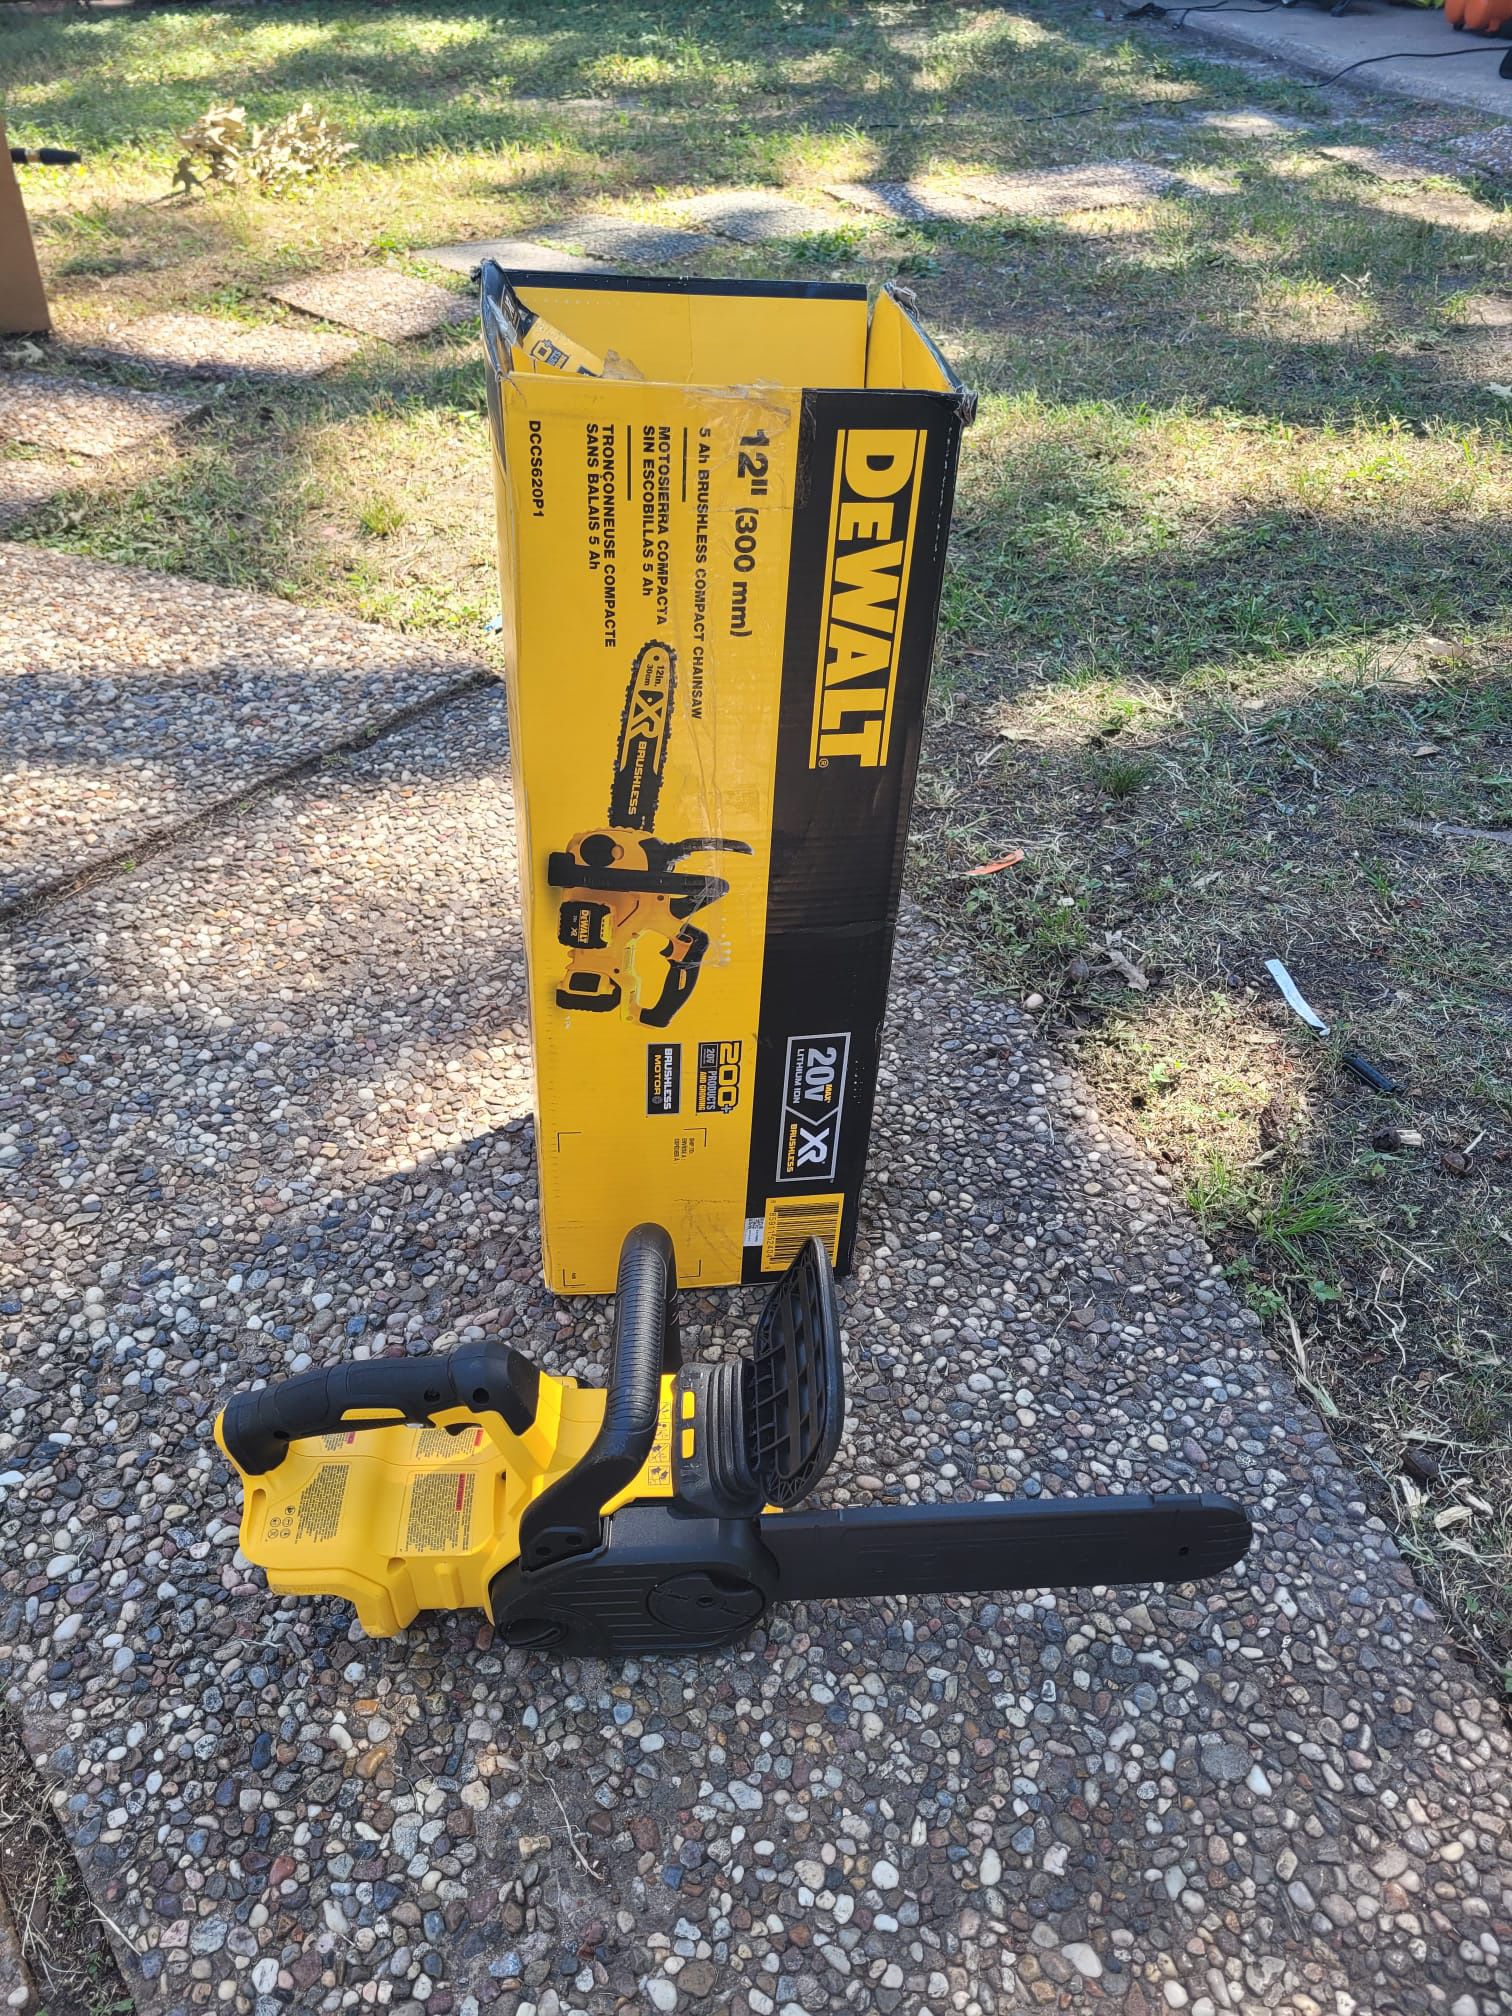 DEWALT 20V MAX 12in. Brushless Cordless Battery Powered Chainsaw, Tool Only